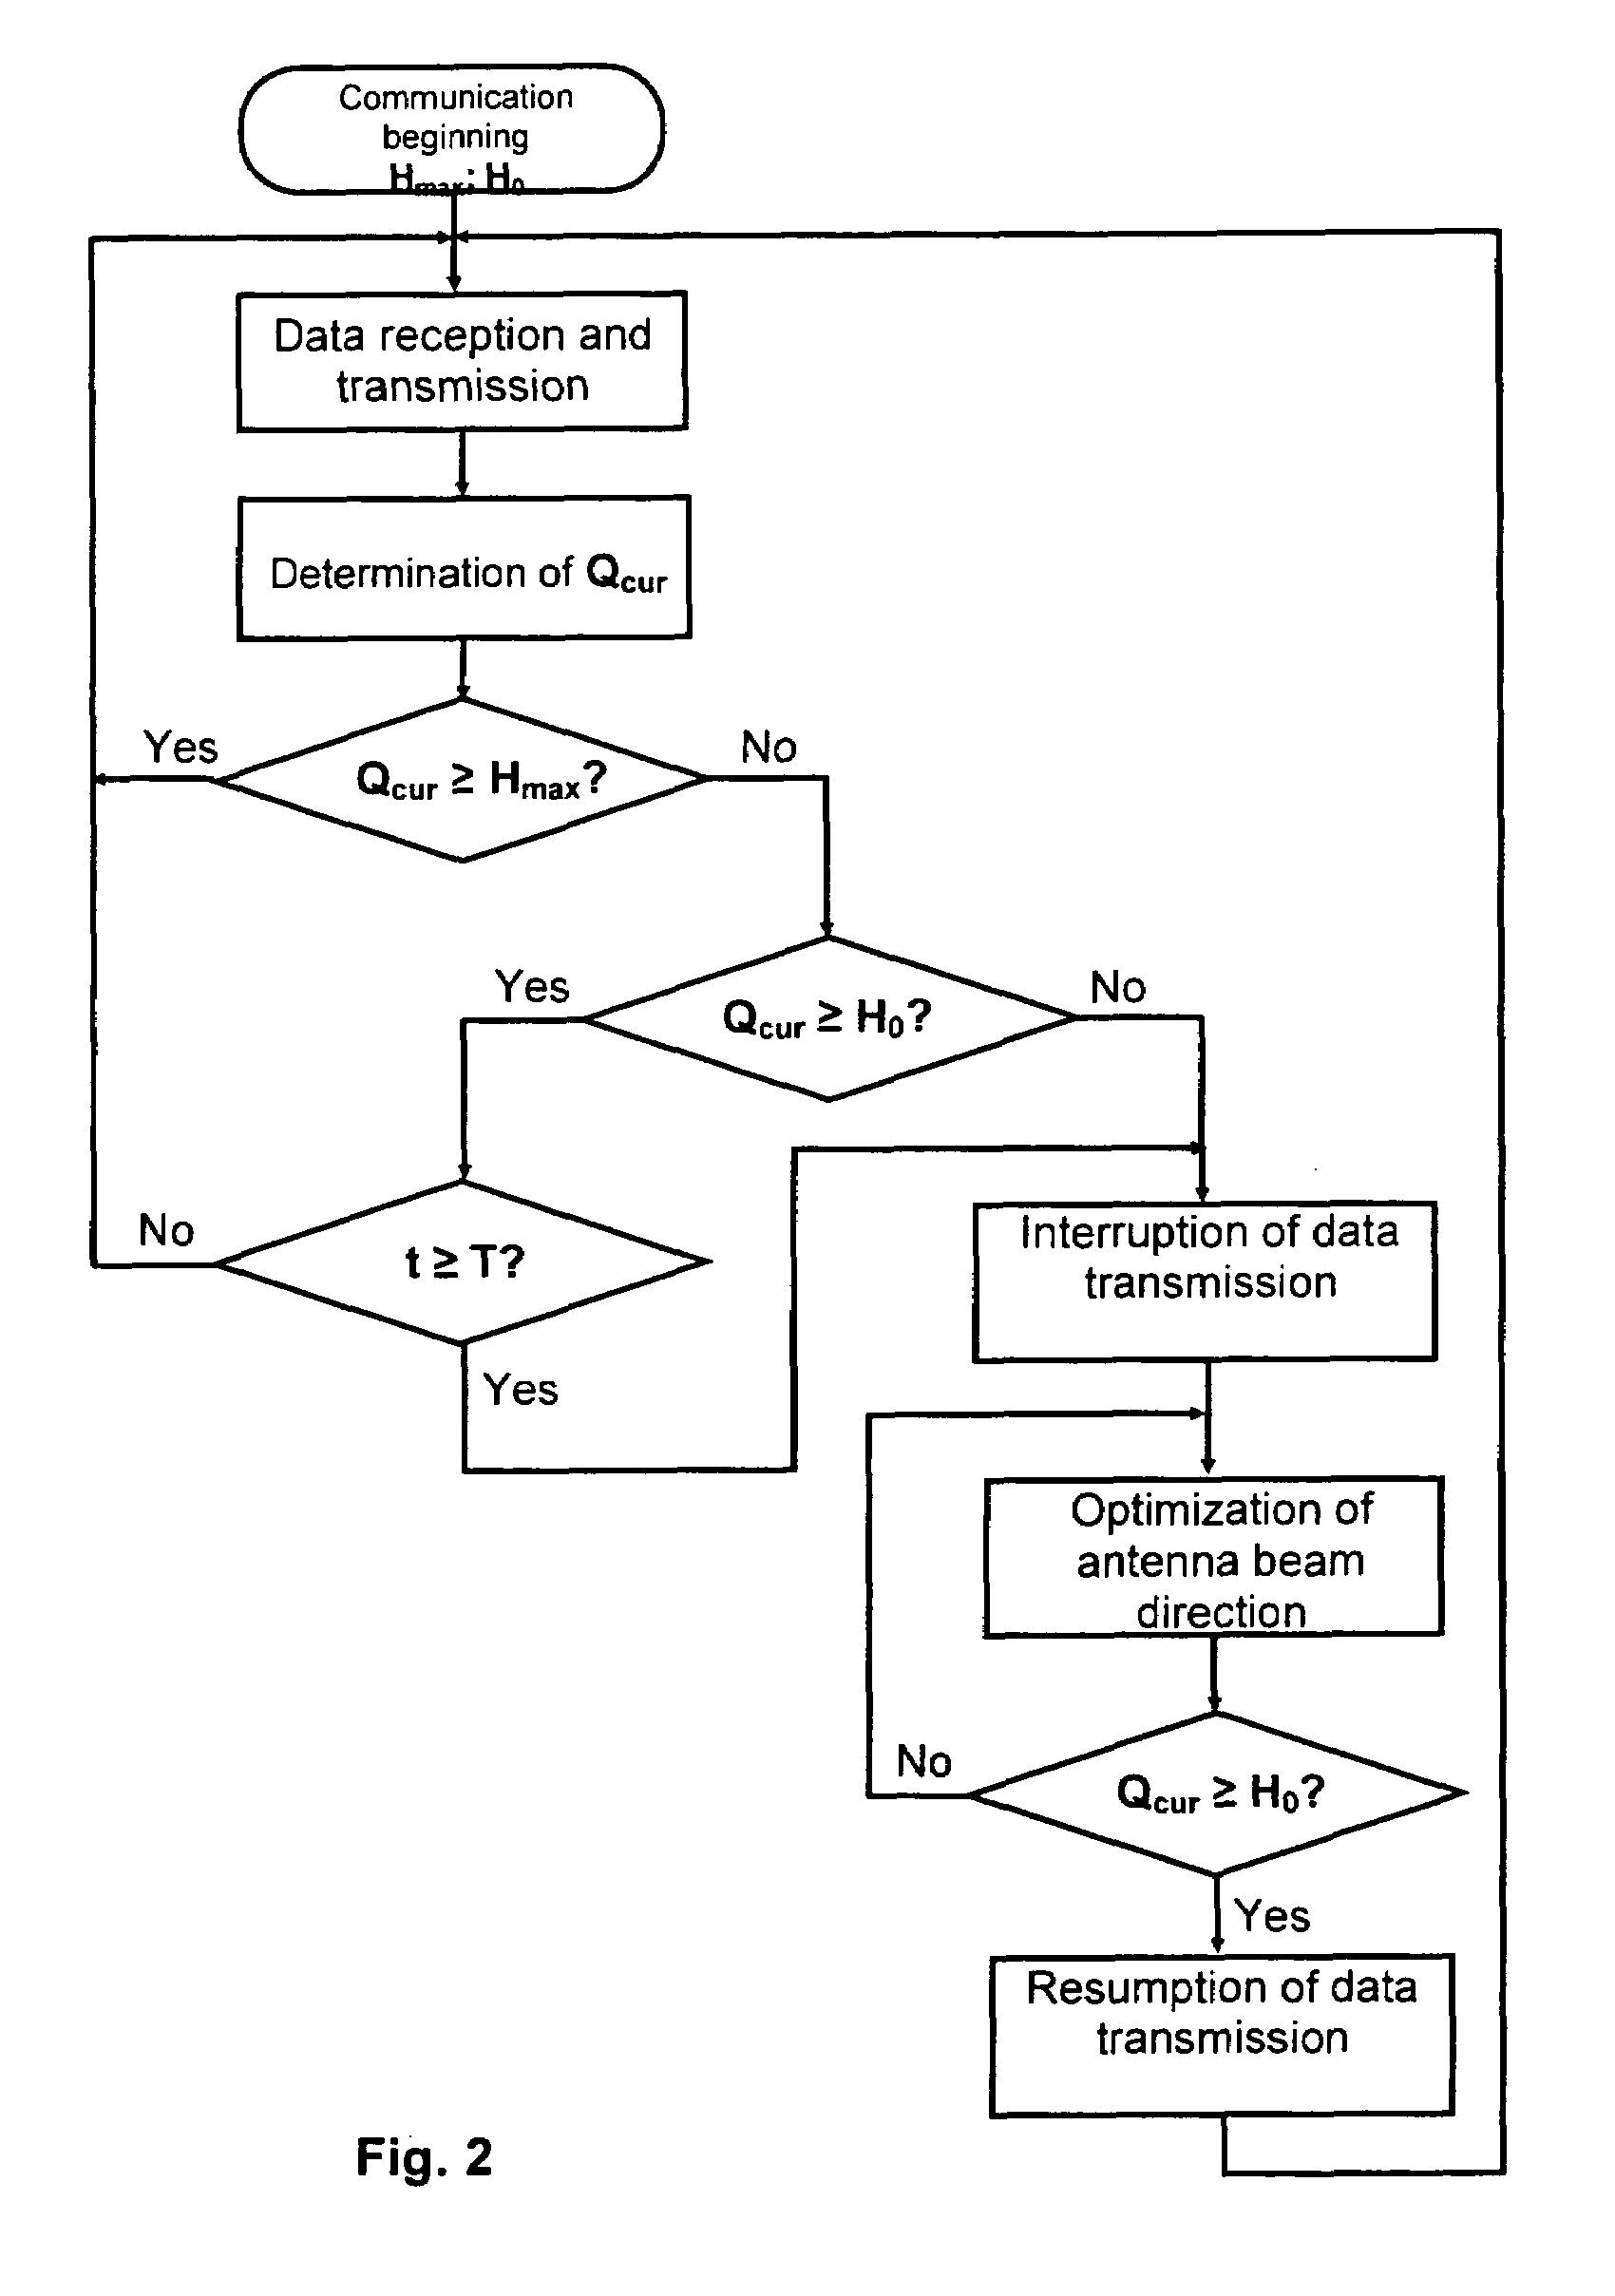 Radio communication method in a wireless local network